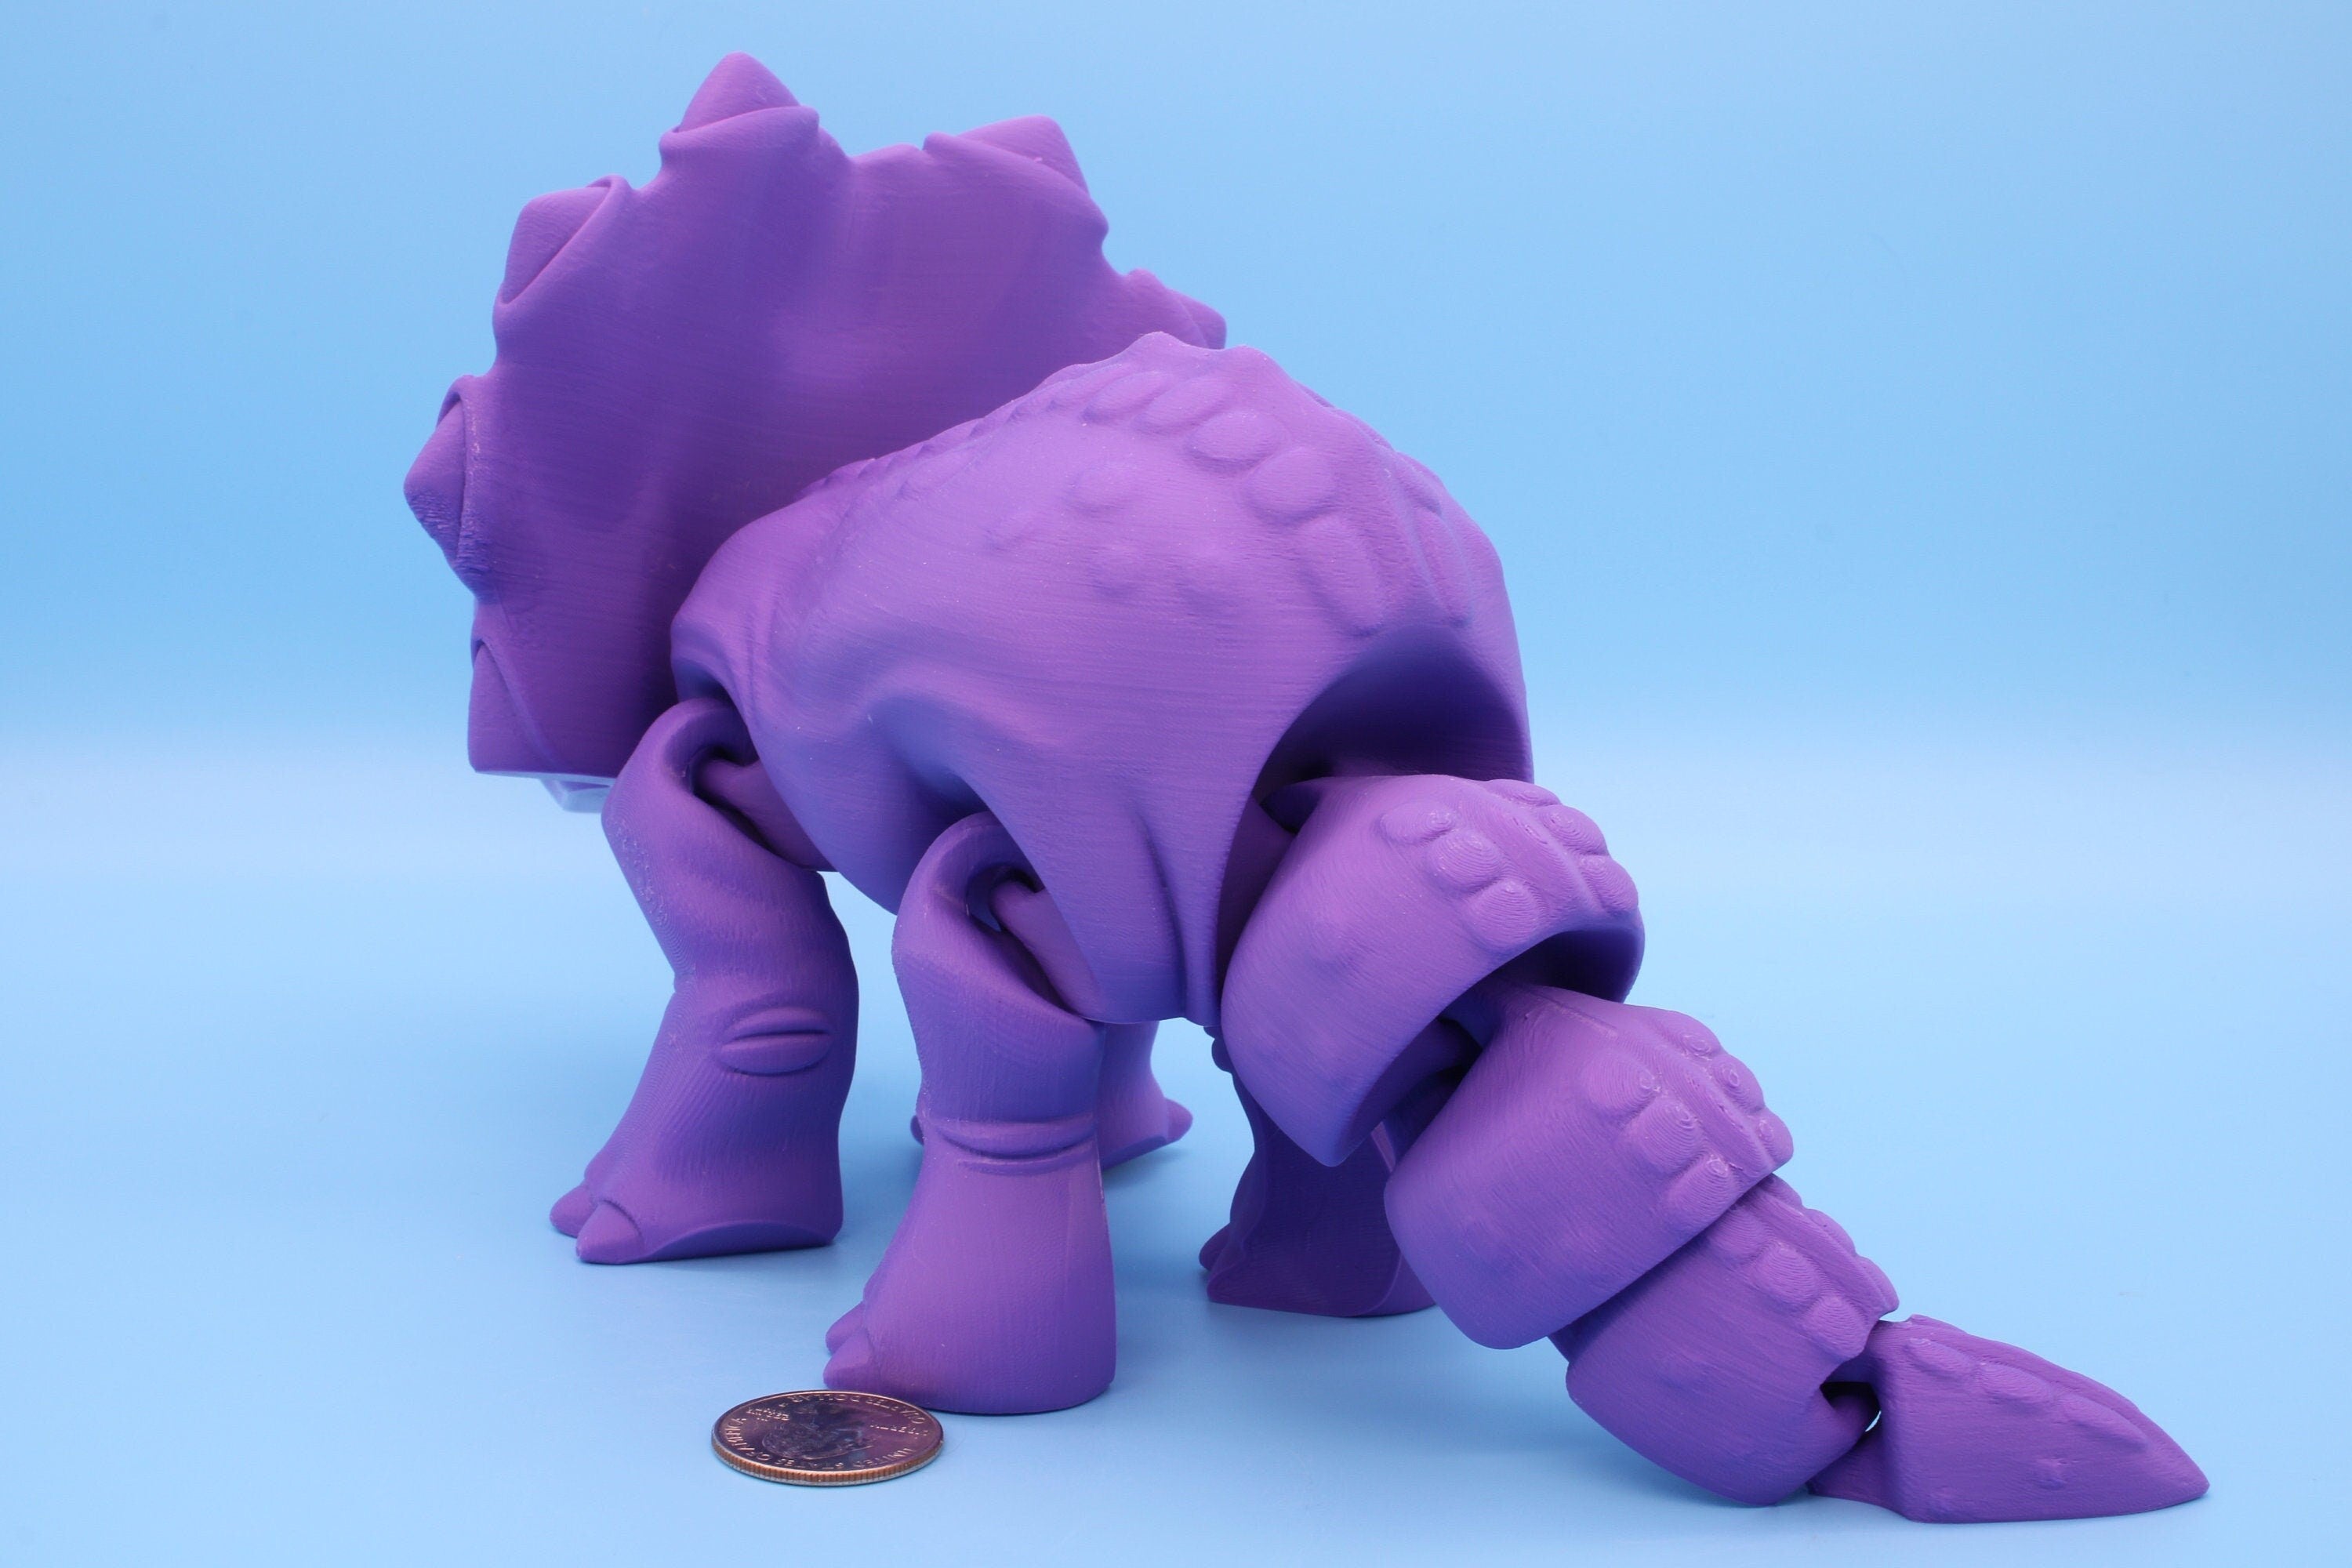 XL Cute Flexi White Triceratops. Unique 3D printed Triceratops. Great Articulating fidget toy, desk, sensory toy. 12 inch